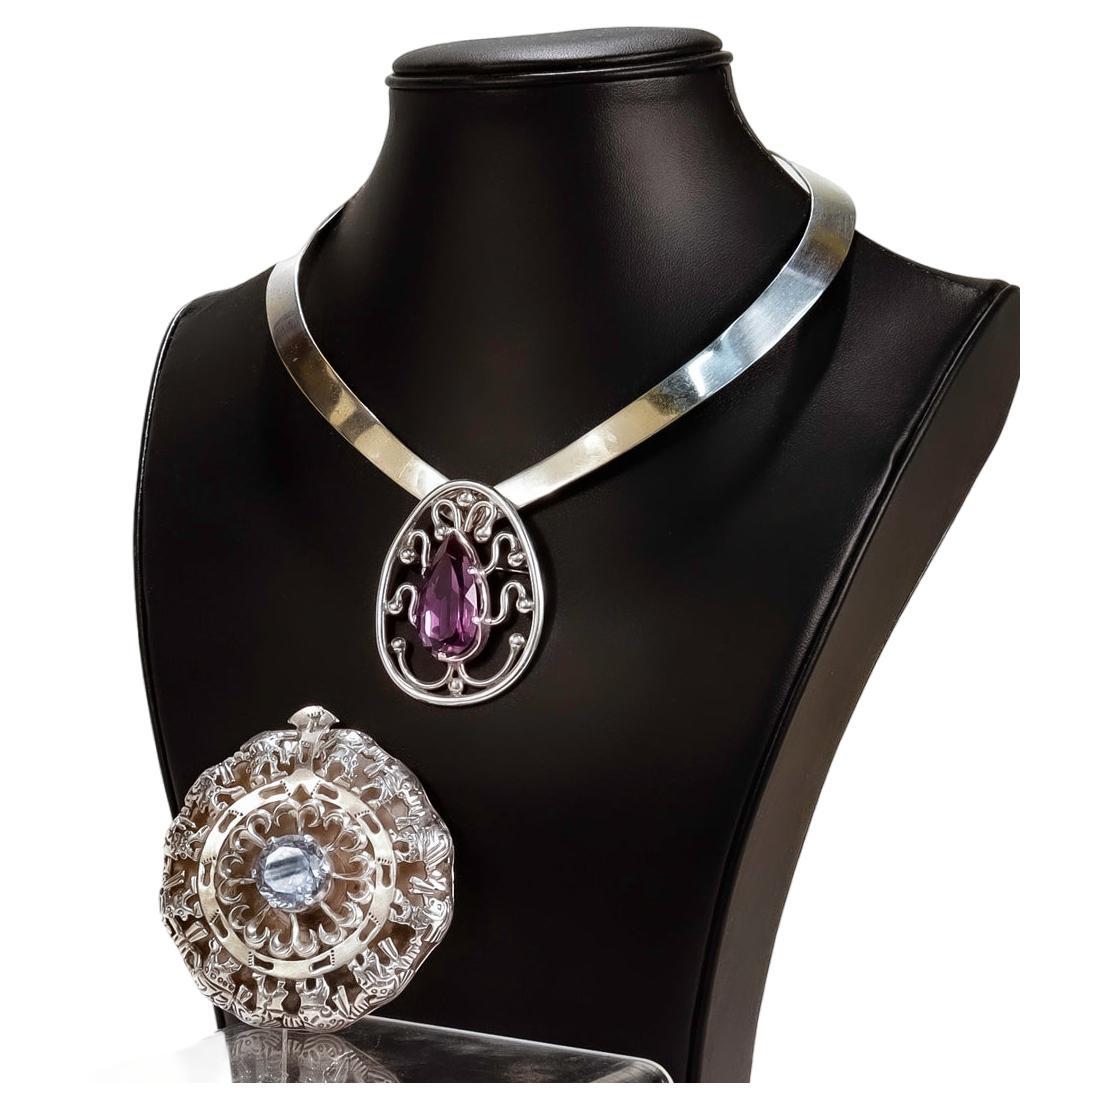 Los Ballesteros Choker Necklace Set with Two Convertible Brooch / Pendants